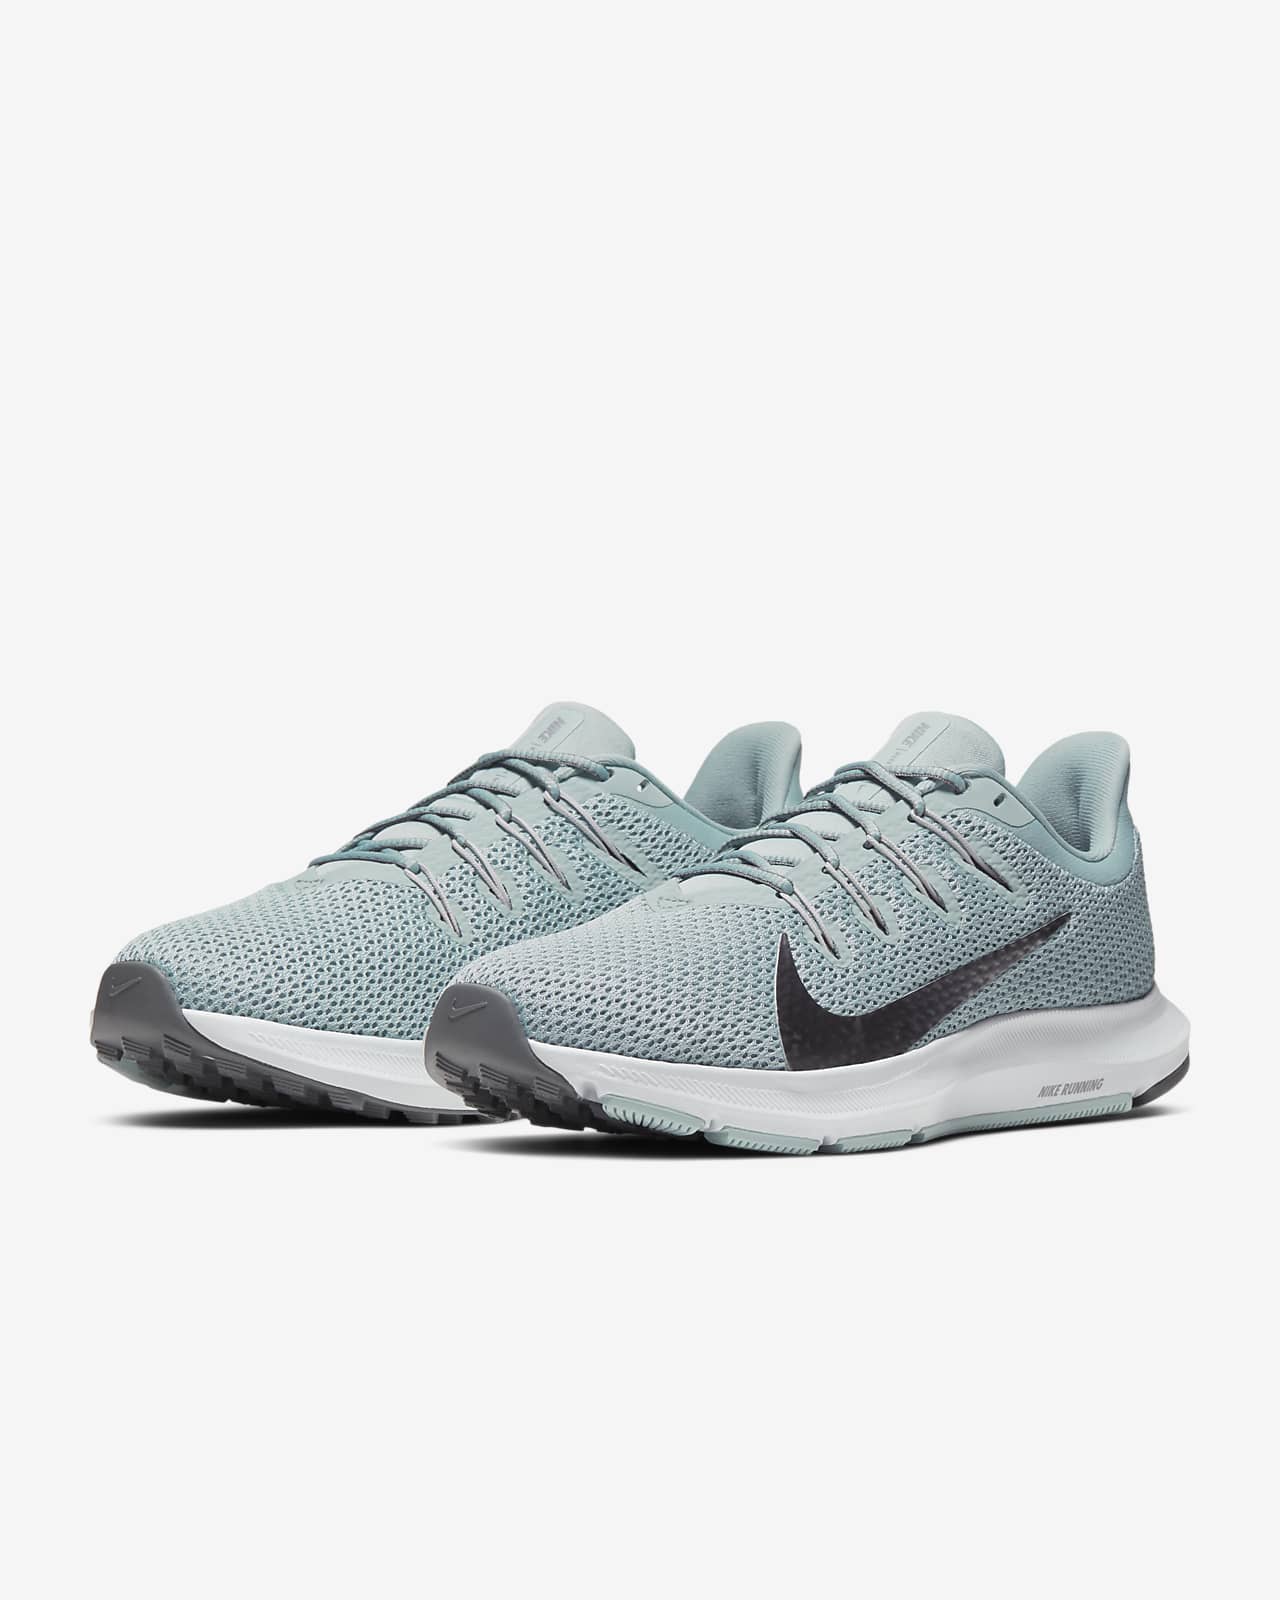 nike womens running shoes teal